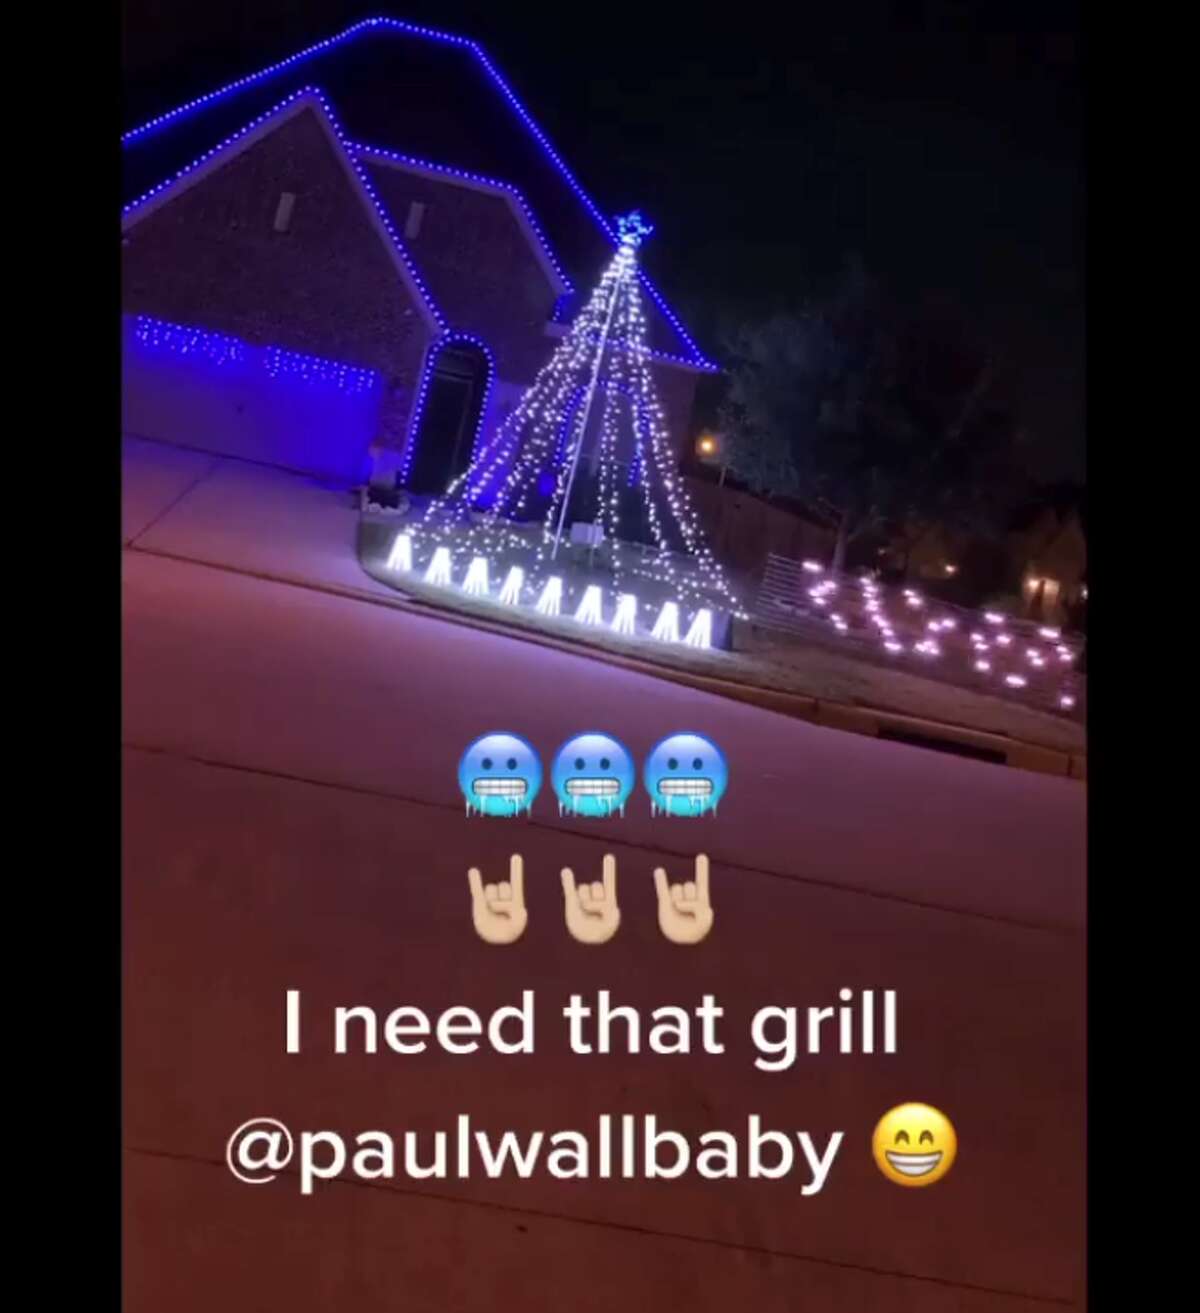 Former Houston DJ Frankie To-ong has a few iconic H-town muses when it comes to Christmas decorations in his neighborhood including Paul Wall and Slim Thug.